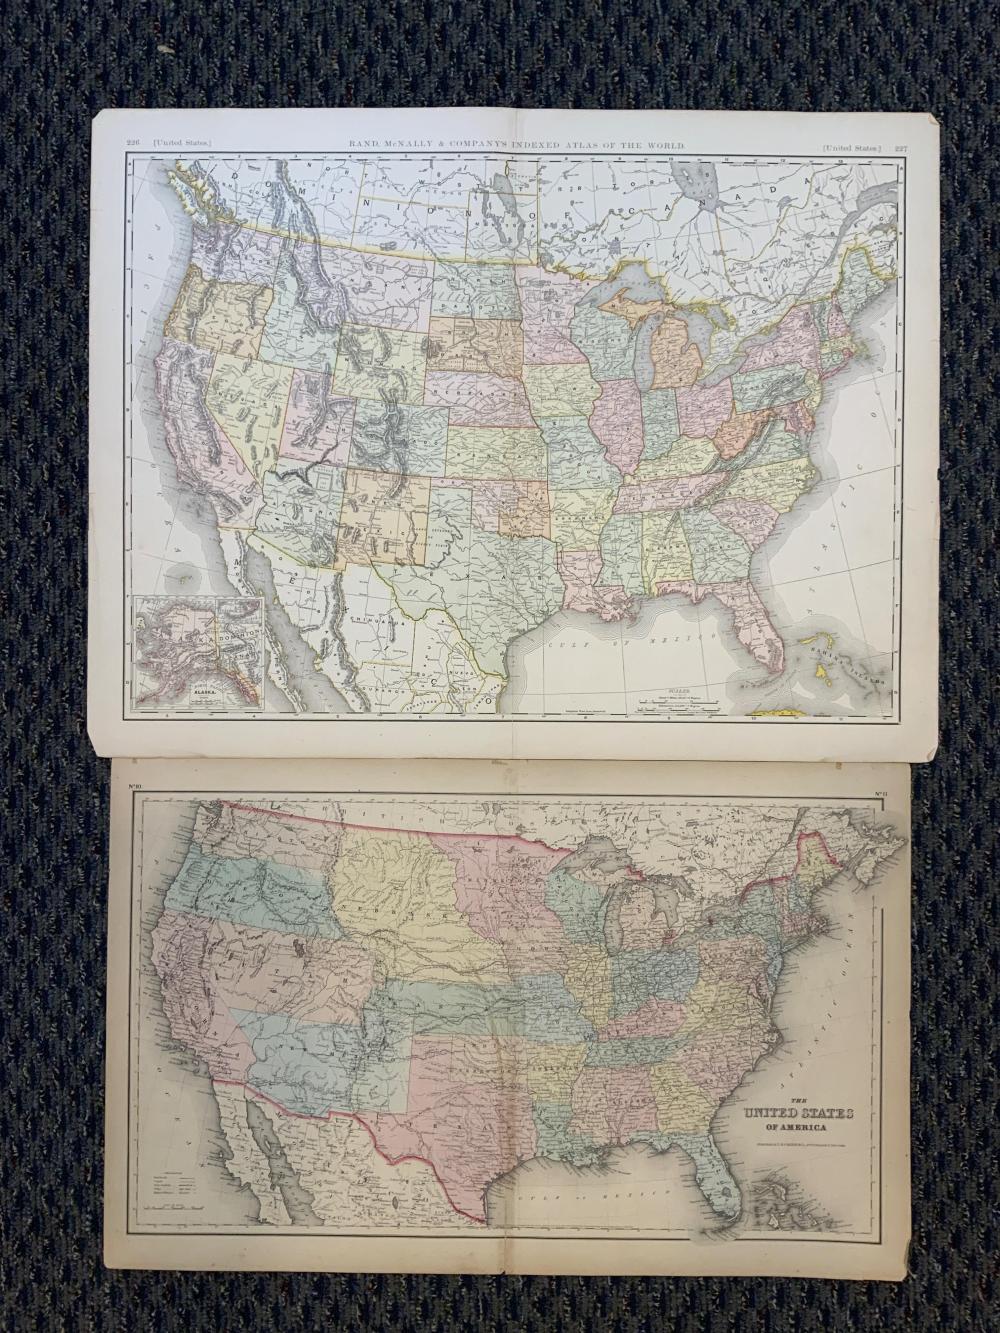 TWO UNFRAMED MAPS OF THE UNITED